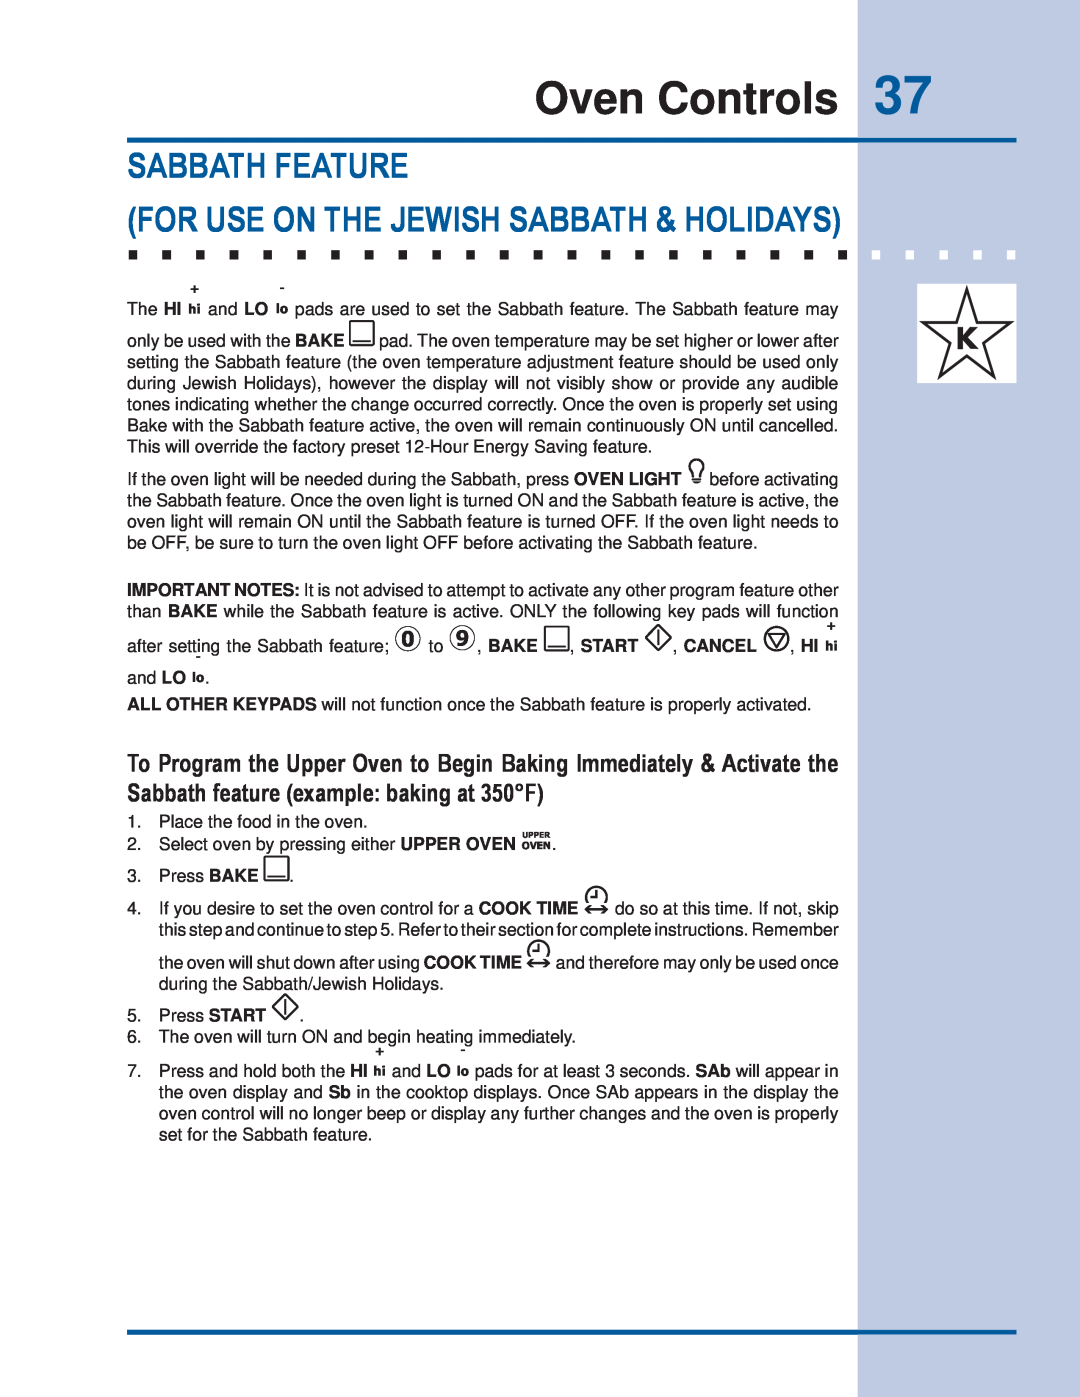 Electrolux EI30ES55JS manual Oven Controls, Sabbath Feature For Use On The Jewish Sabbath & Holidays 